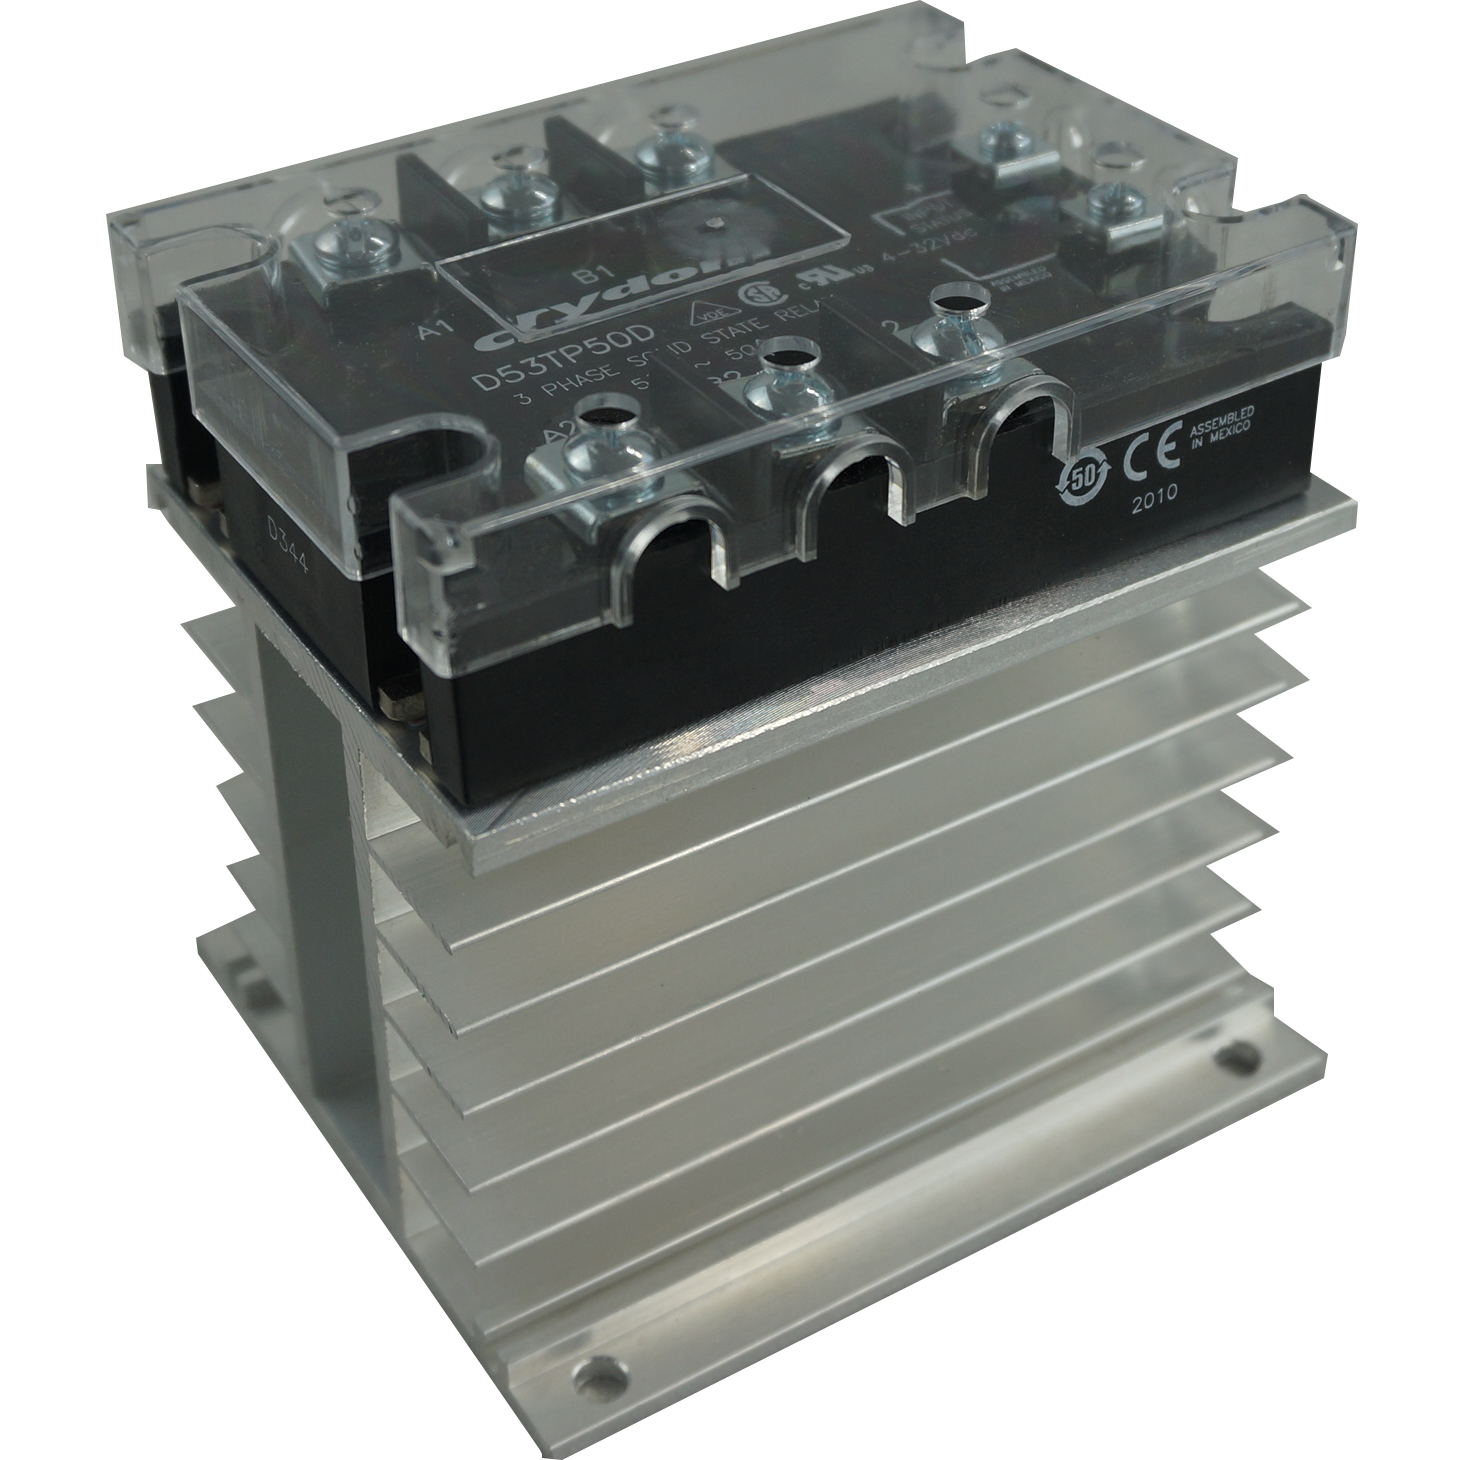 FTH6053ZA4 + HS212, Solid State Relay, and Heatsink Assembly, 3 Phase 90-280VAC Control, 20 Amp per phase @ 40 Deg C, 48-530VAC Load, LED Status Indicator, with IP20 Cover